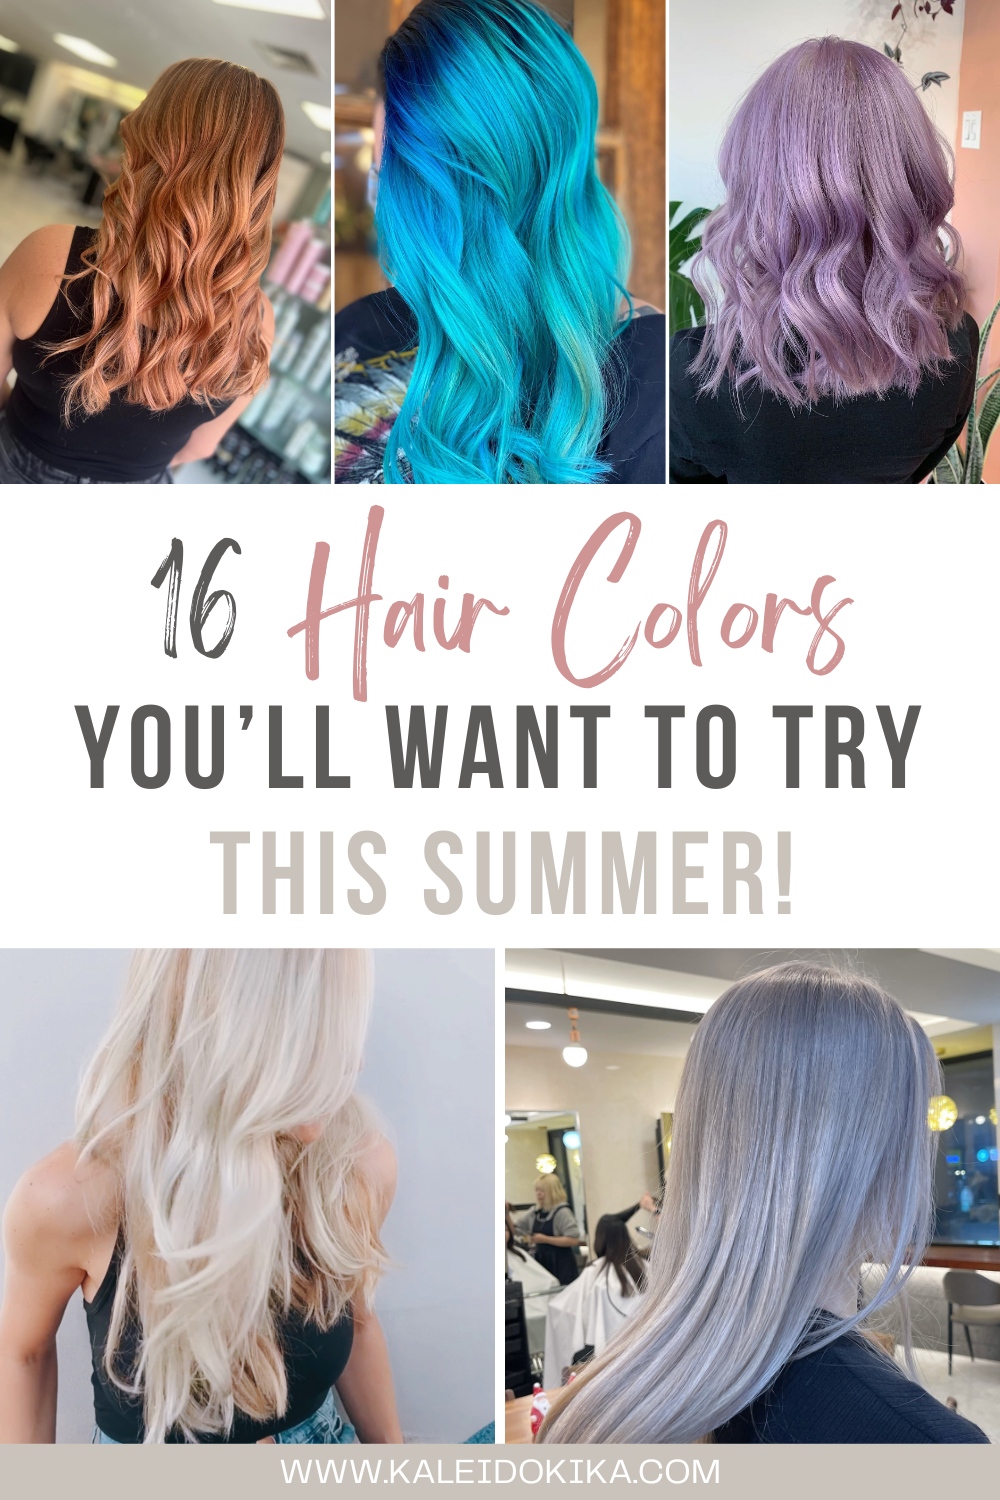 Image showing 16 hair colors trends for summer